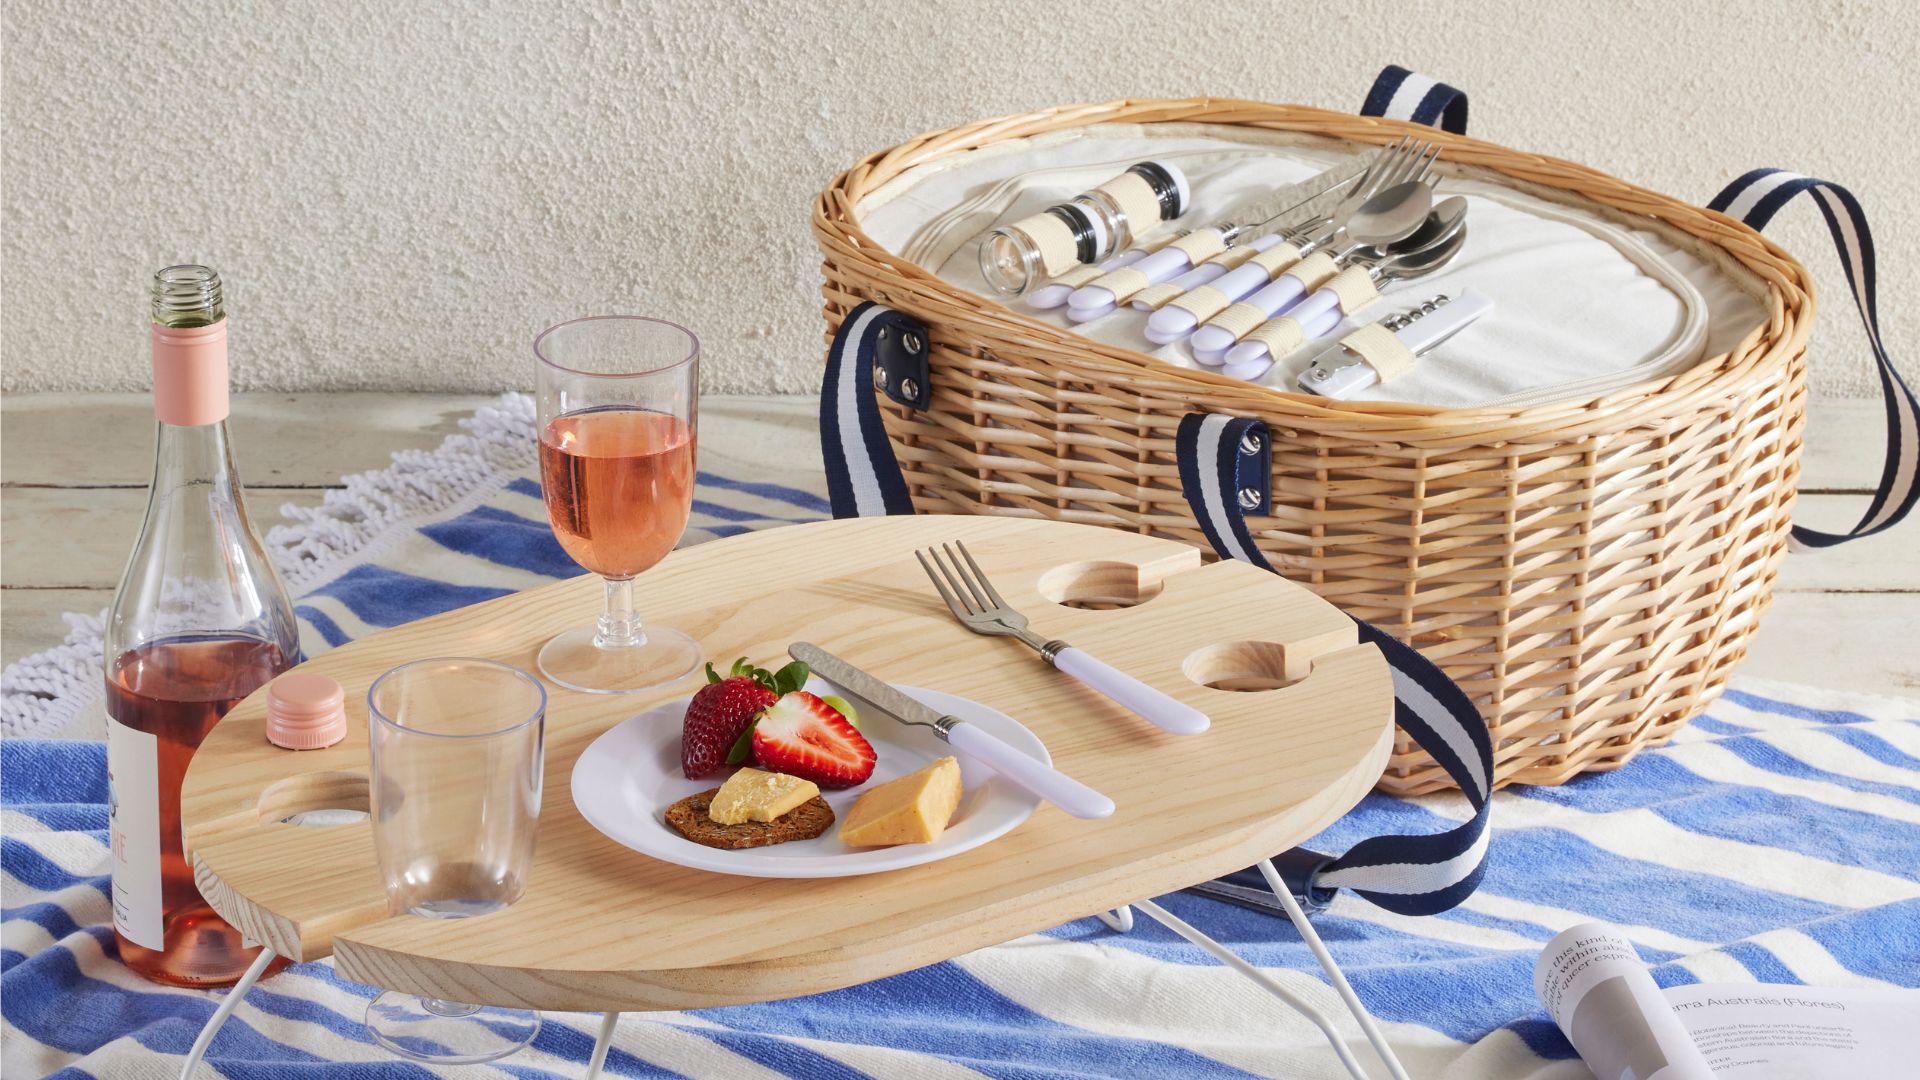 Picnic ideas for the ultimate outdoor adventure